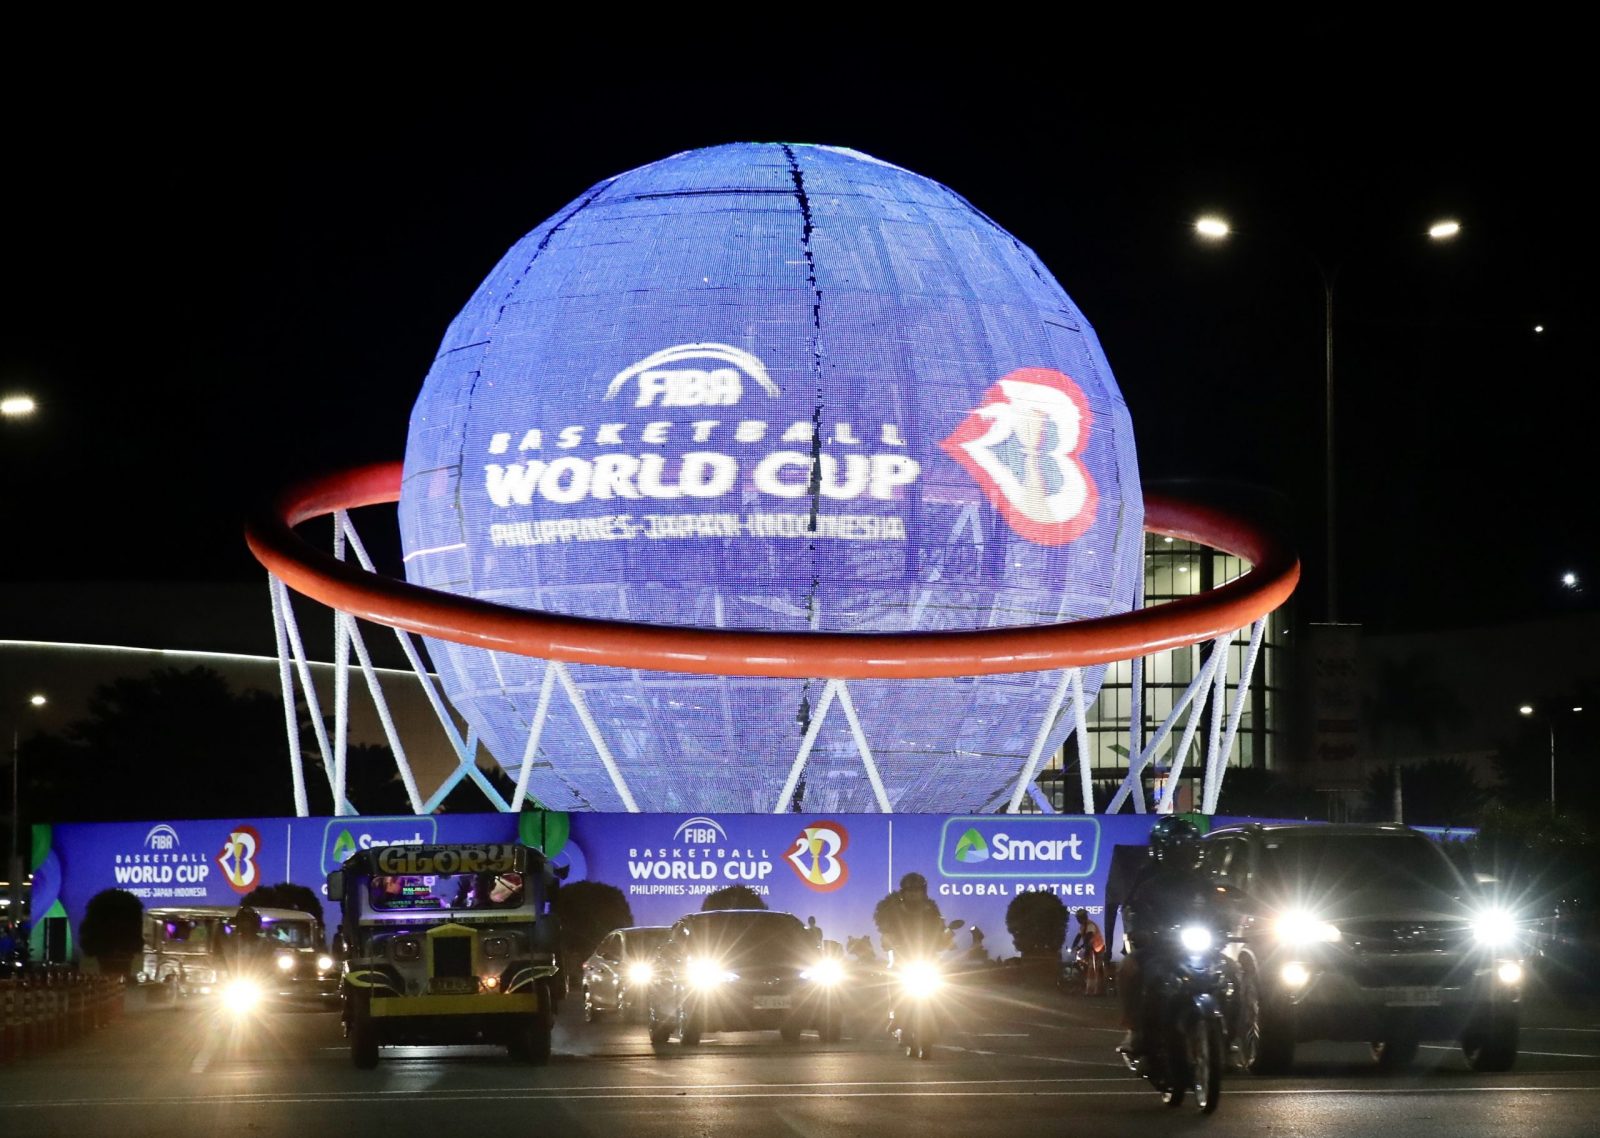 epa10802876 A giant FIBA Basketball World Cup globe with a giant basketball hoop on display at Mall of Asia arena in Manila, Philippines, 16 August 2023. President Ferdinand ‘Bongbong’ Marcos Junior has ordered the suspension of school classes and government work in Metro Manila and Bulacan province on 25 August 2023 as the country is co-hosting the FIBA Basketball World Cup. The competition is held from 25 August to 10 September 2023.  EPA/FRANCIS R. MALASIG